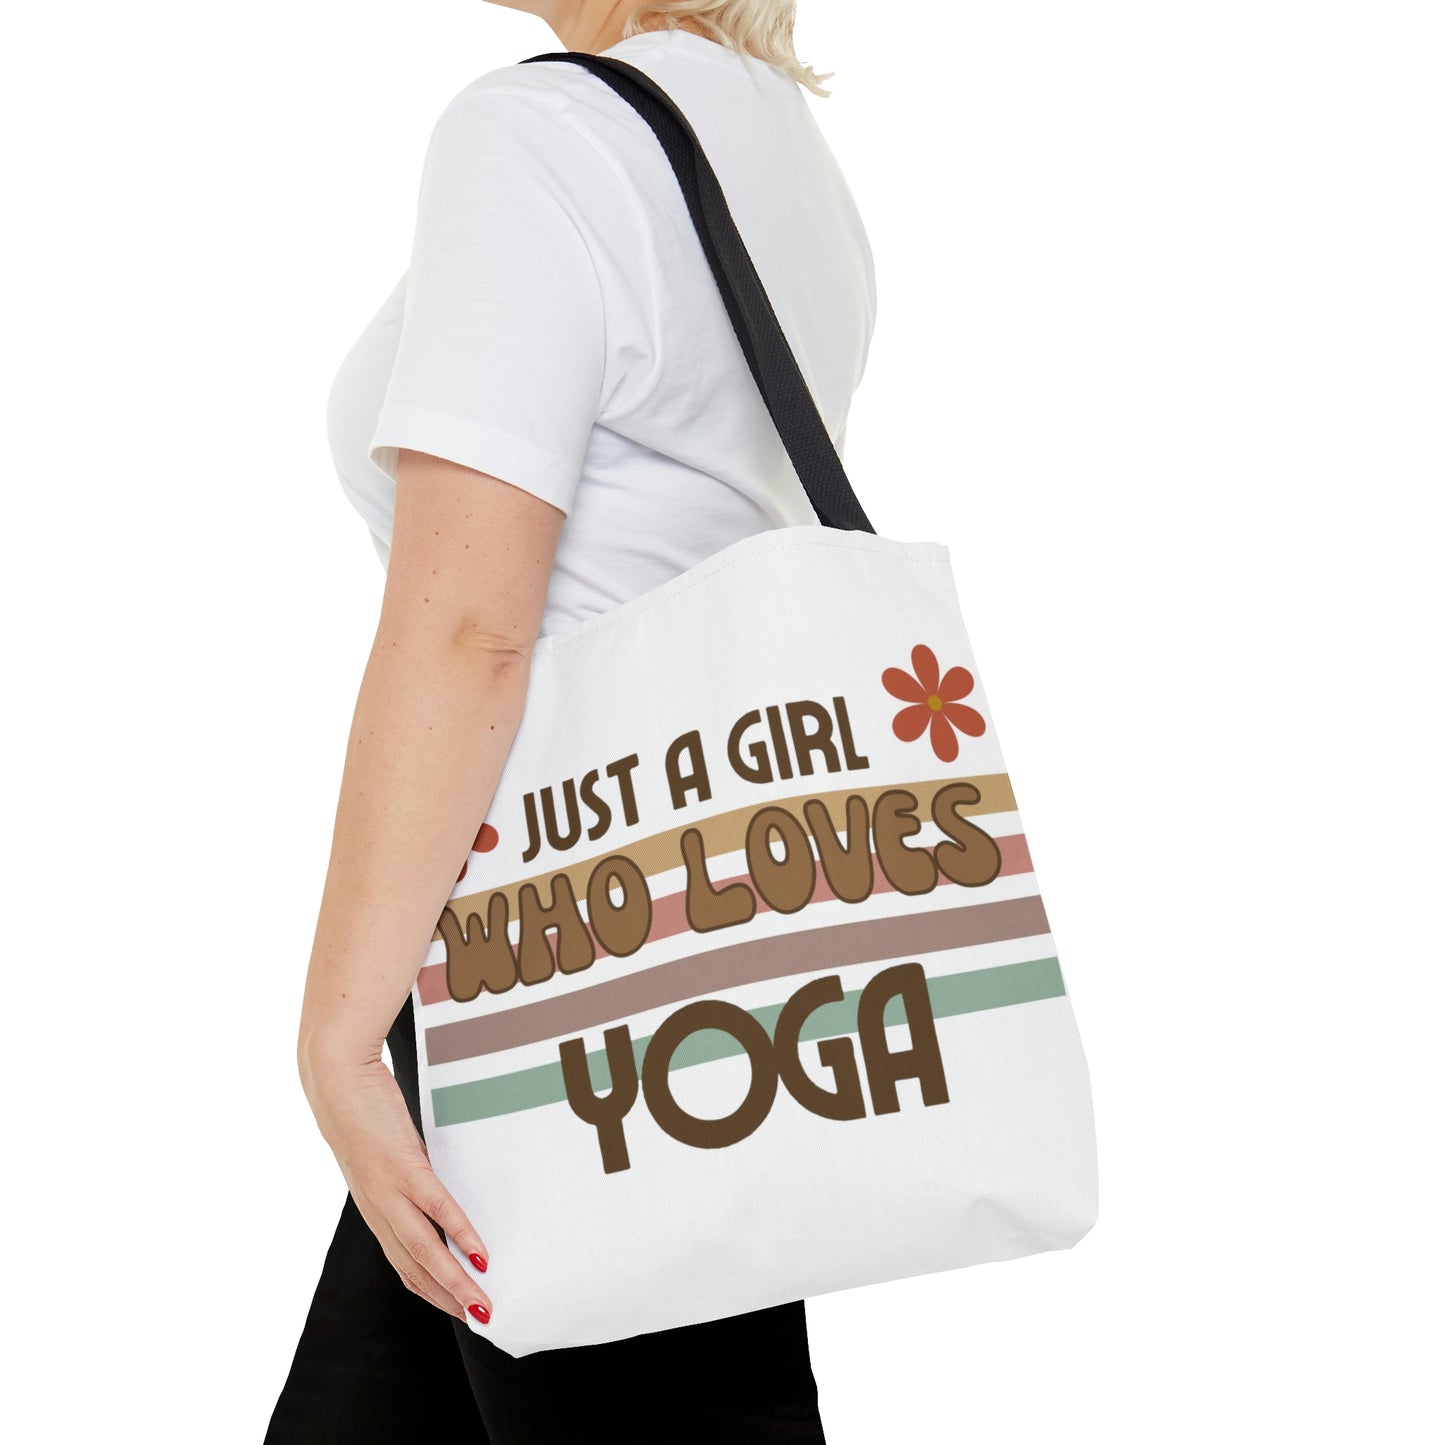 Just A Girl Who Loves Yoga Tote Bag for Yoga Class,  Yoga Theme Gifts, Workout Accessories, Barre Tote Bag, Yoga Lover